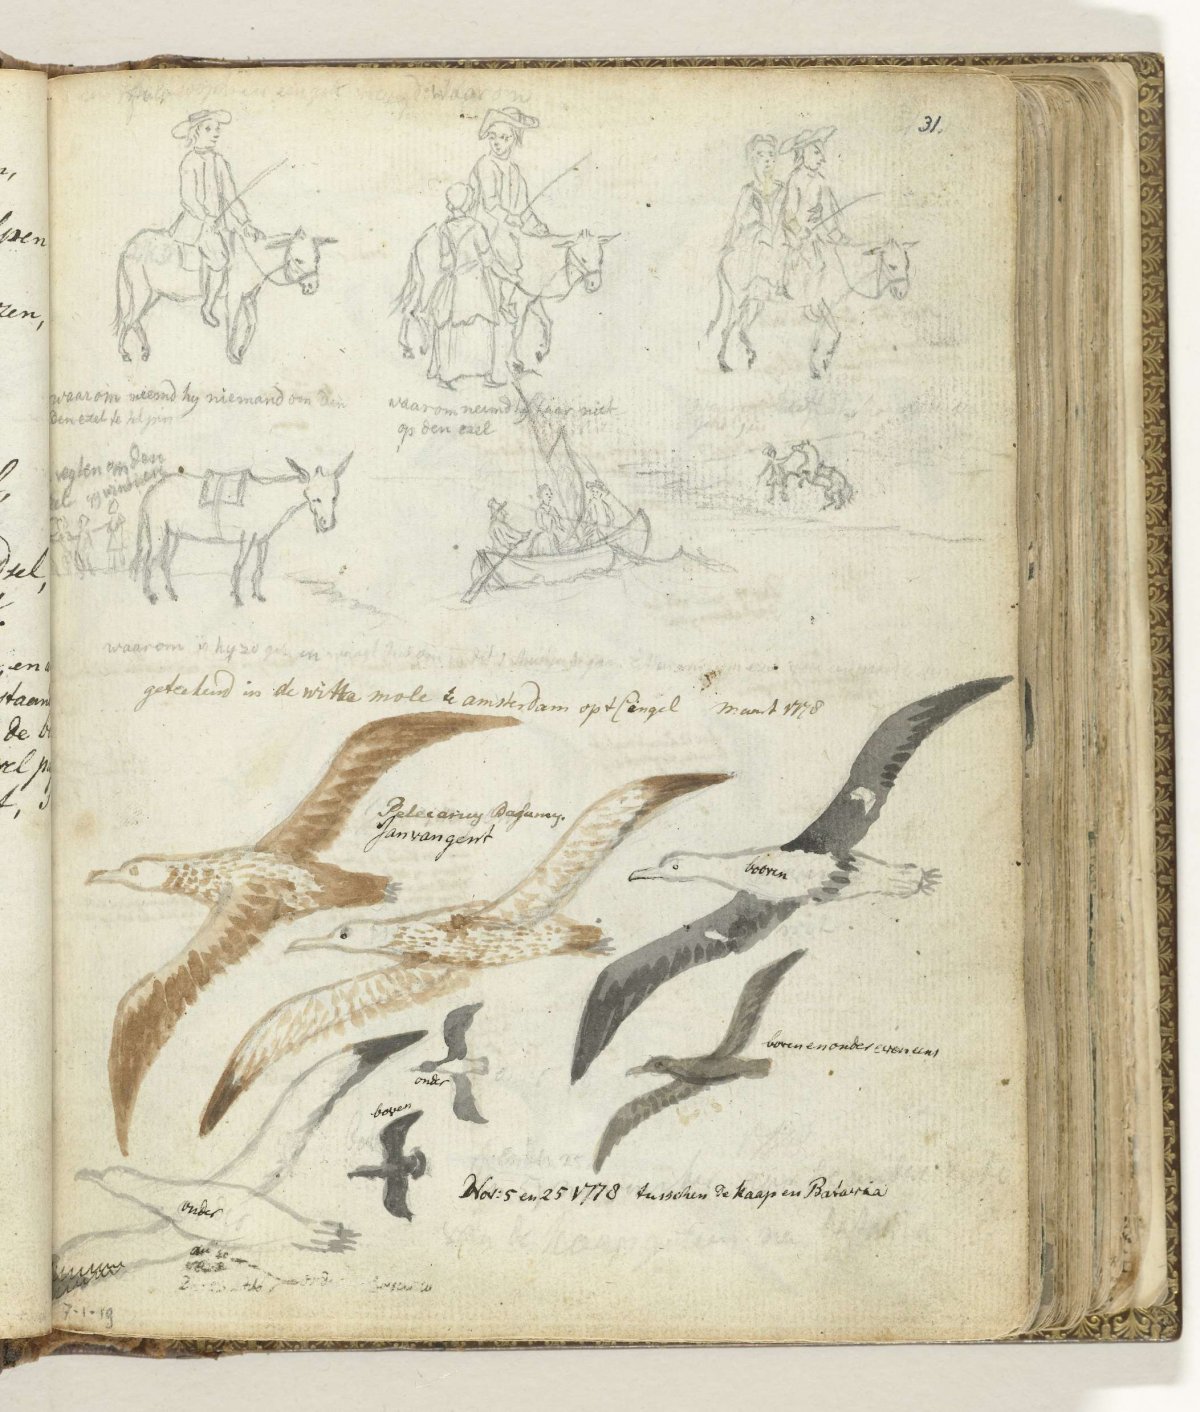 Story about man and donkey. Seabirds, Jan Brandes, 1778